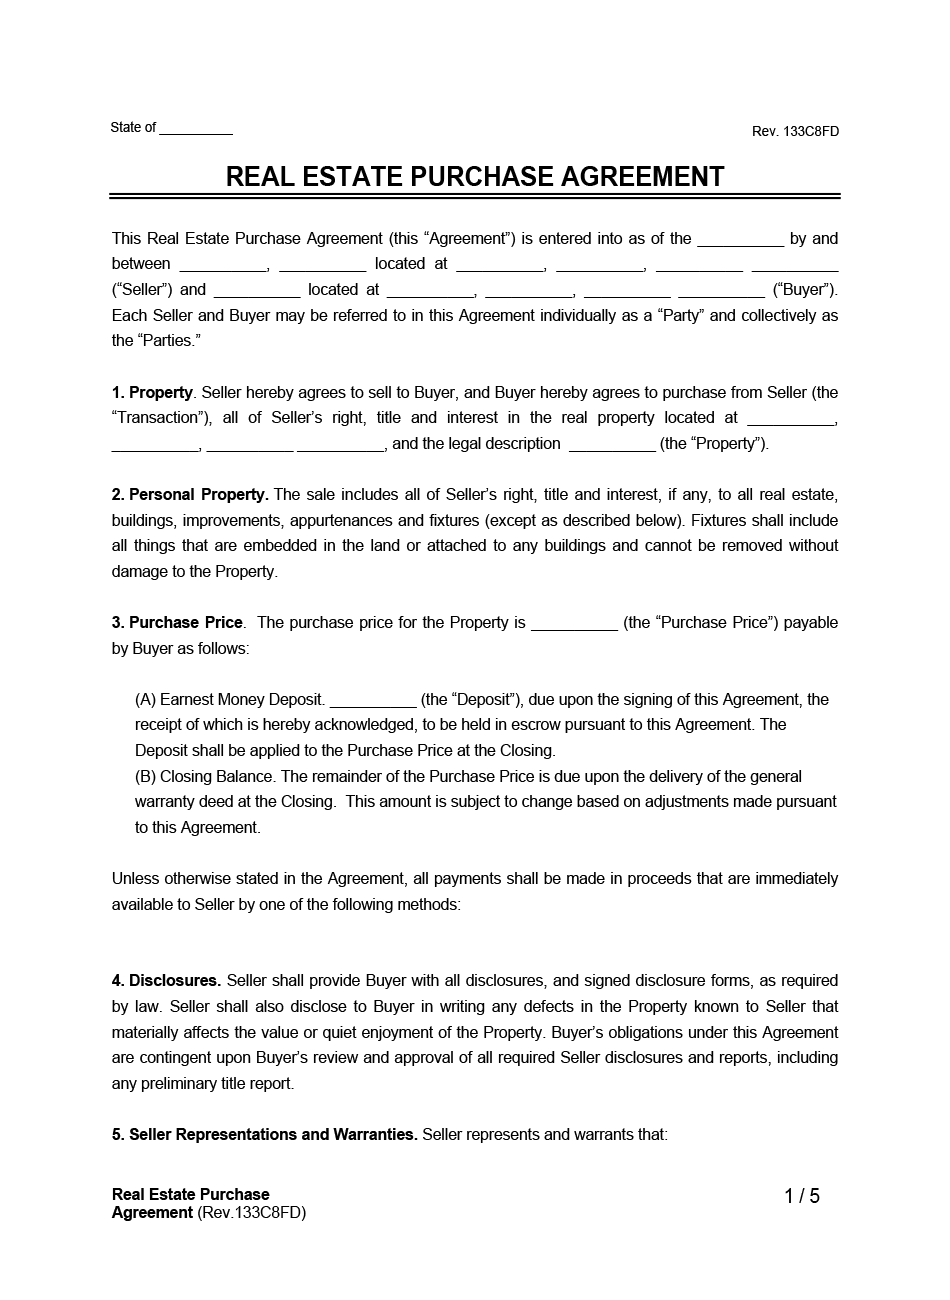 Real Estate Purchase Agreement Example Form